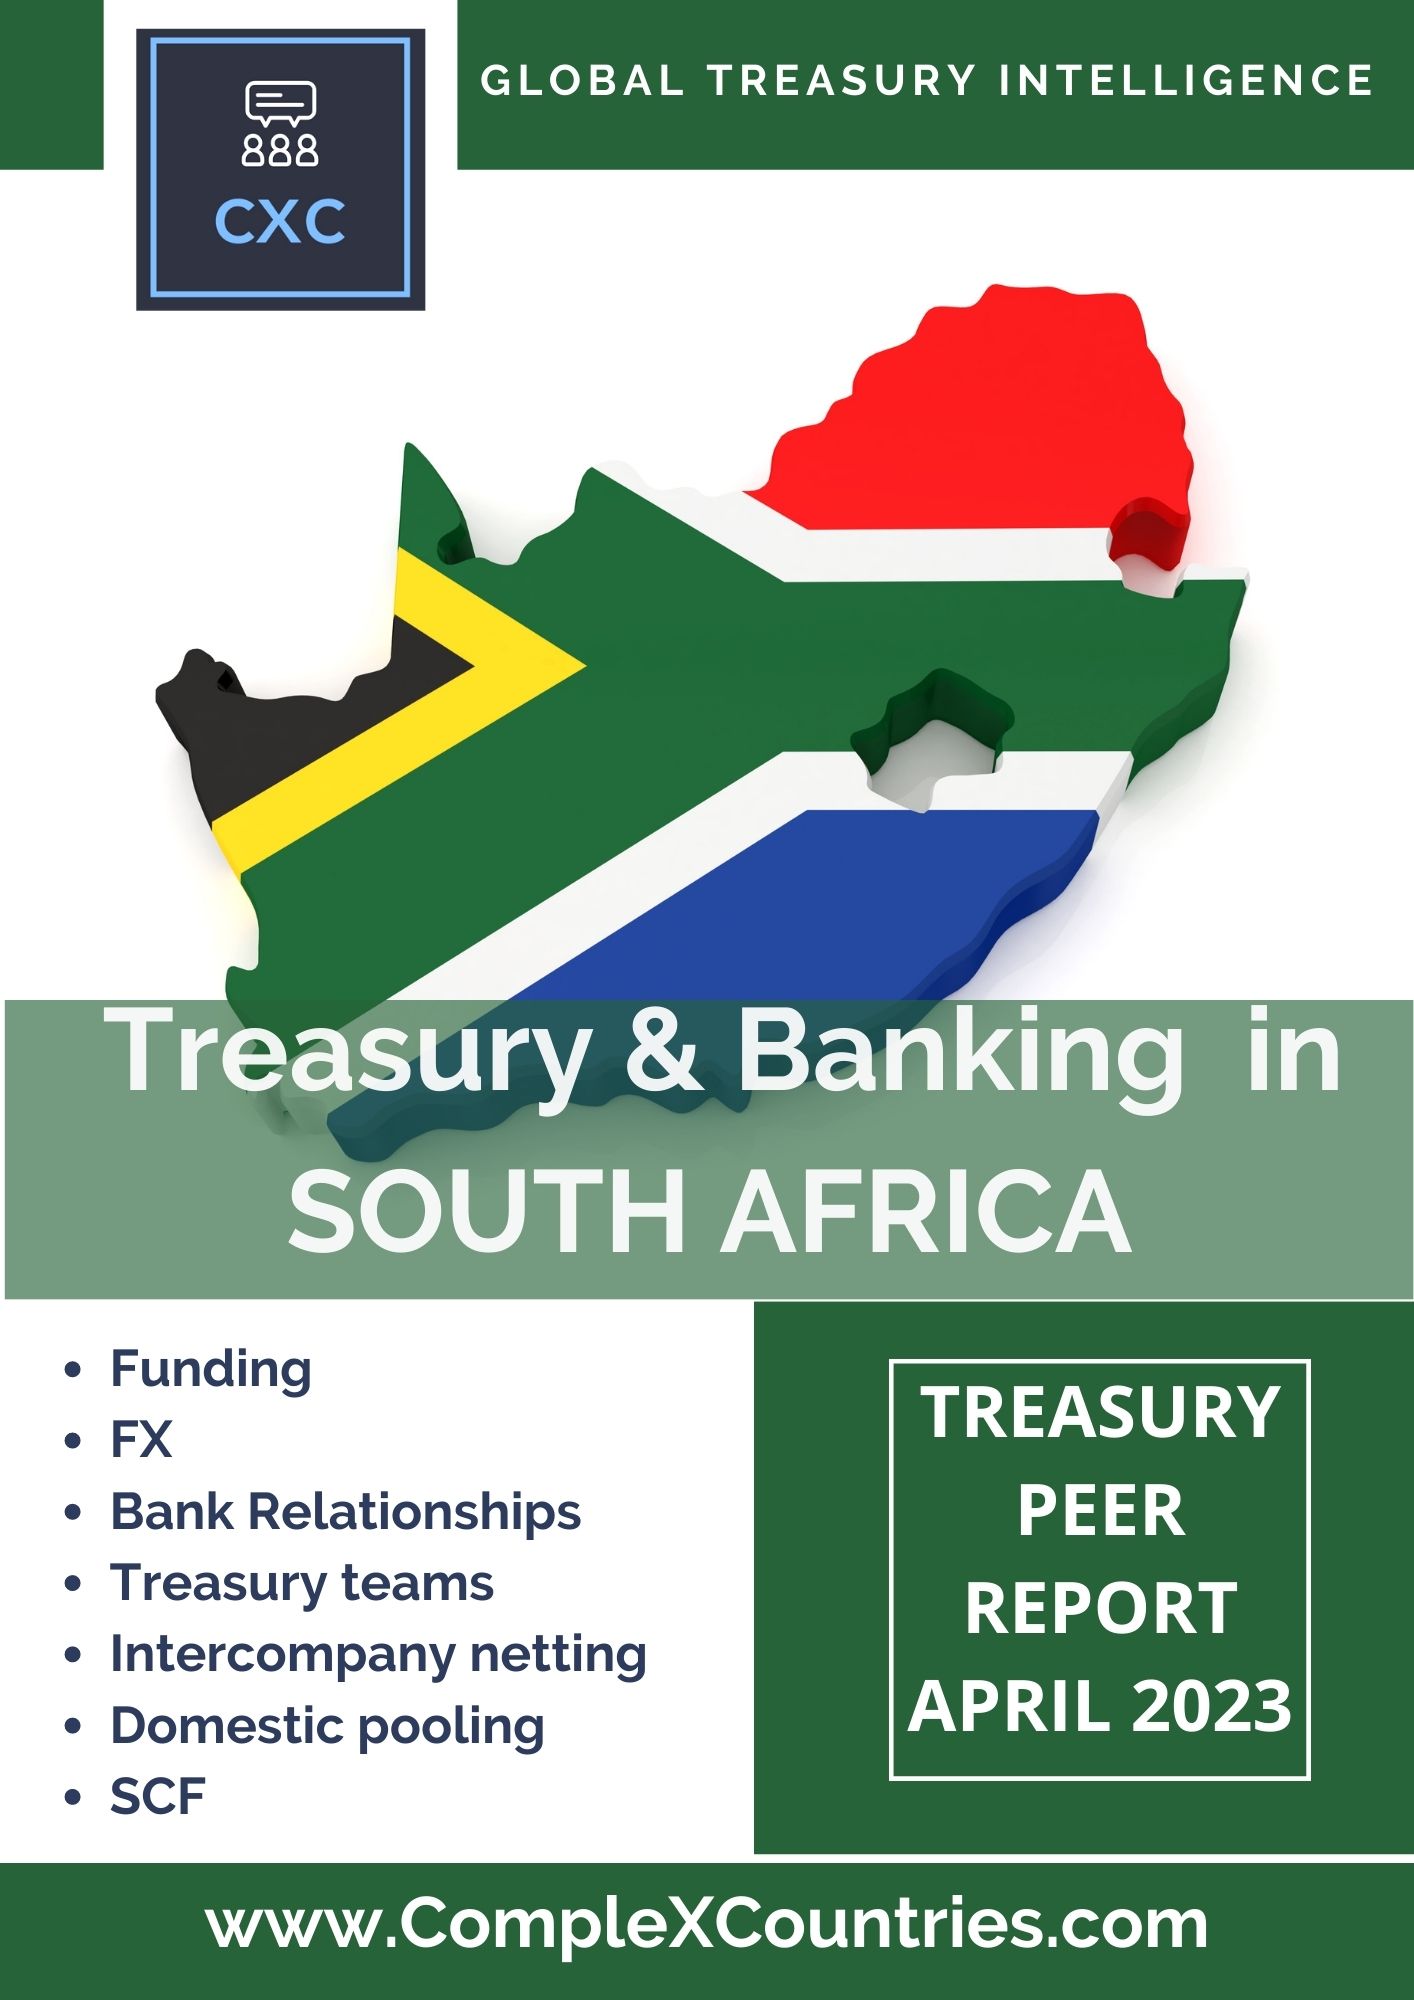 Treasury & Banking in South Africa